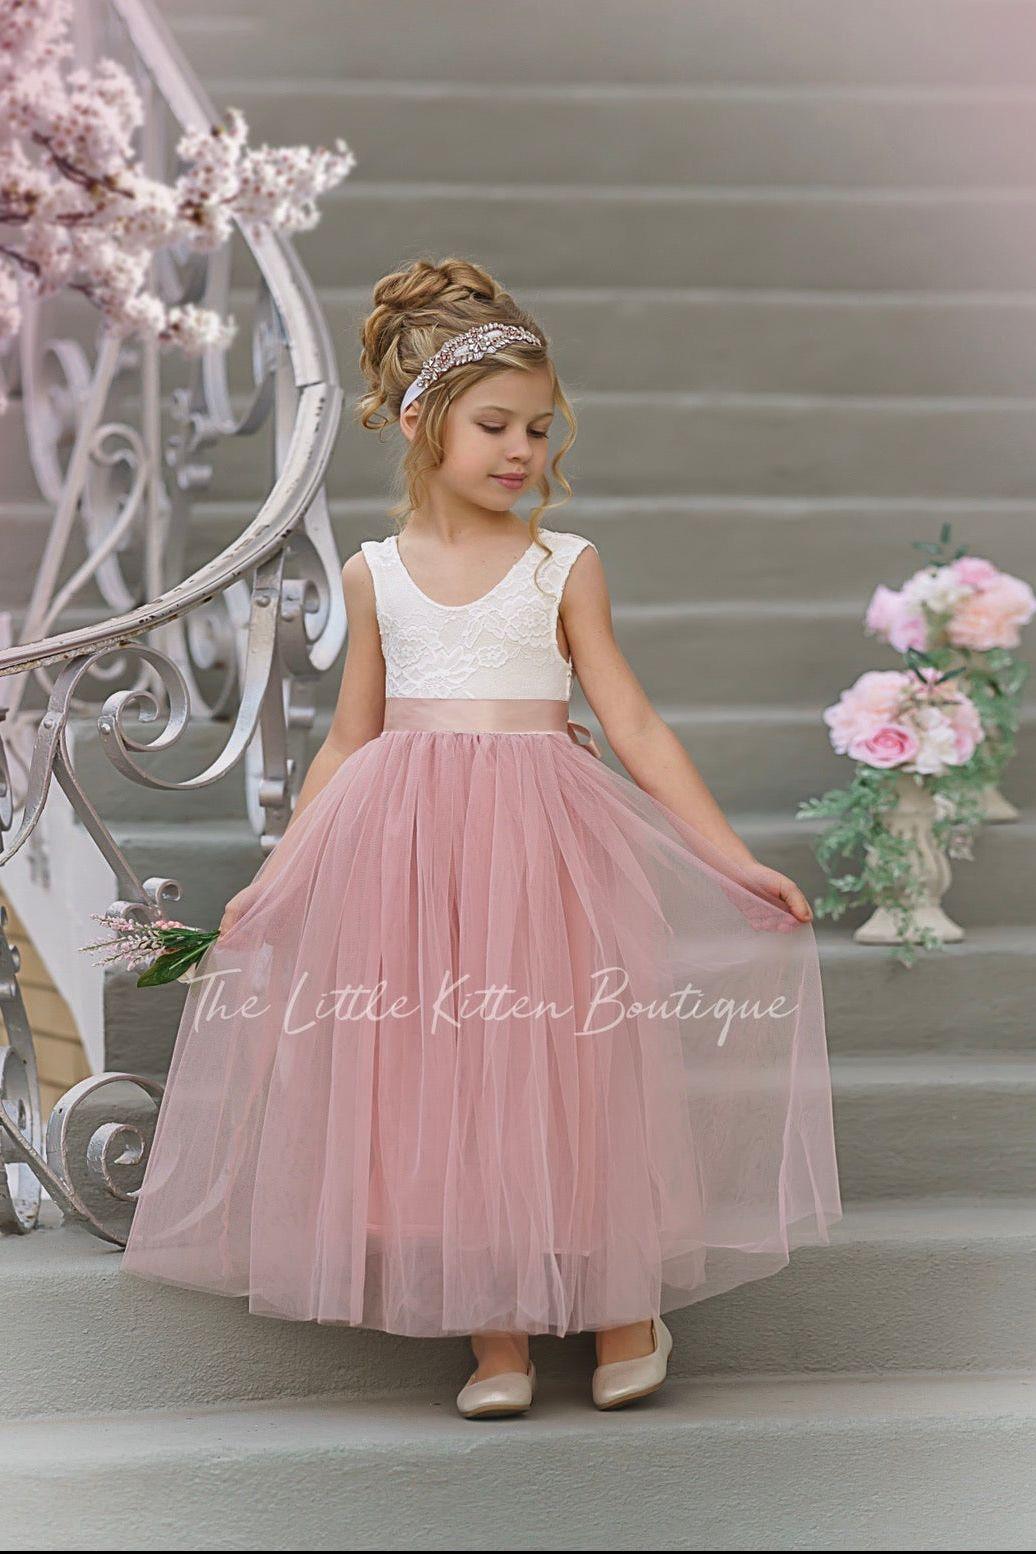 Stunning special occasion dresses perfect for weddings, flower girls or  parties-matching little girls 12m-size 3 to big sister sizes 4-8… |  Instagram